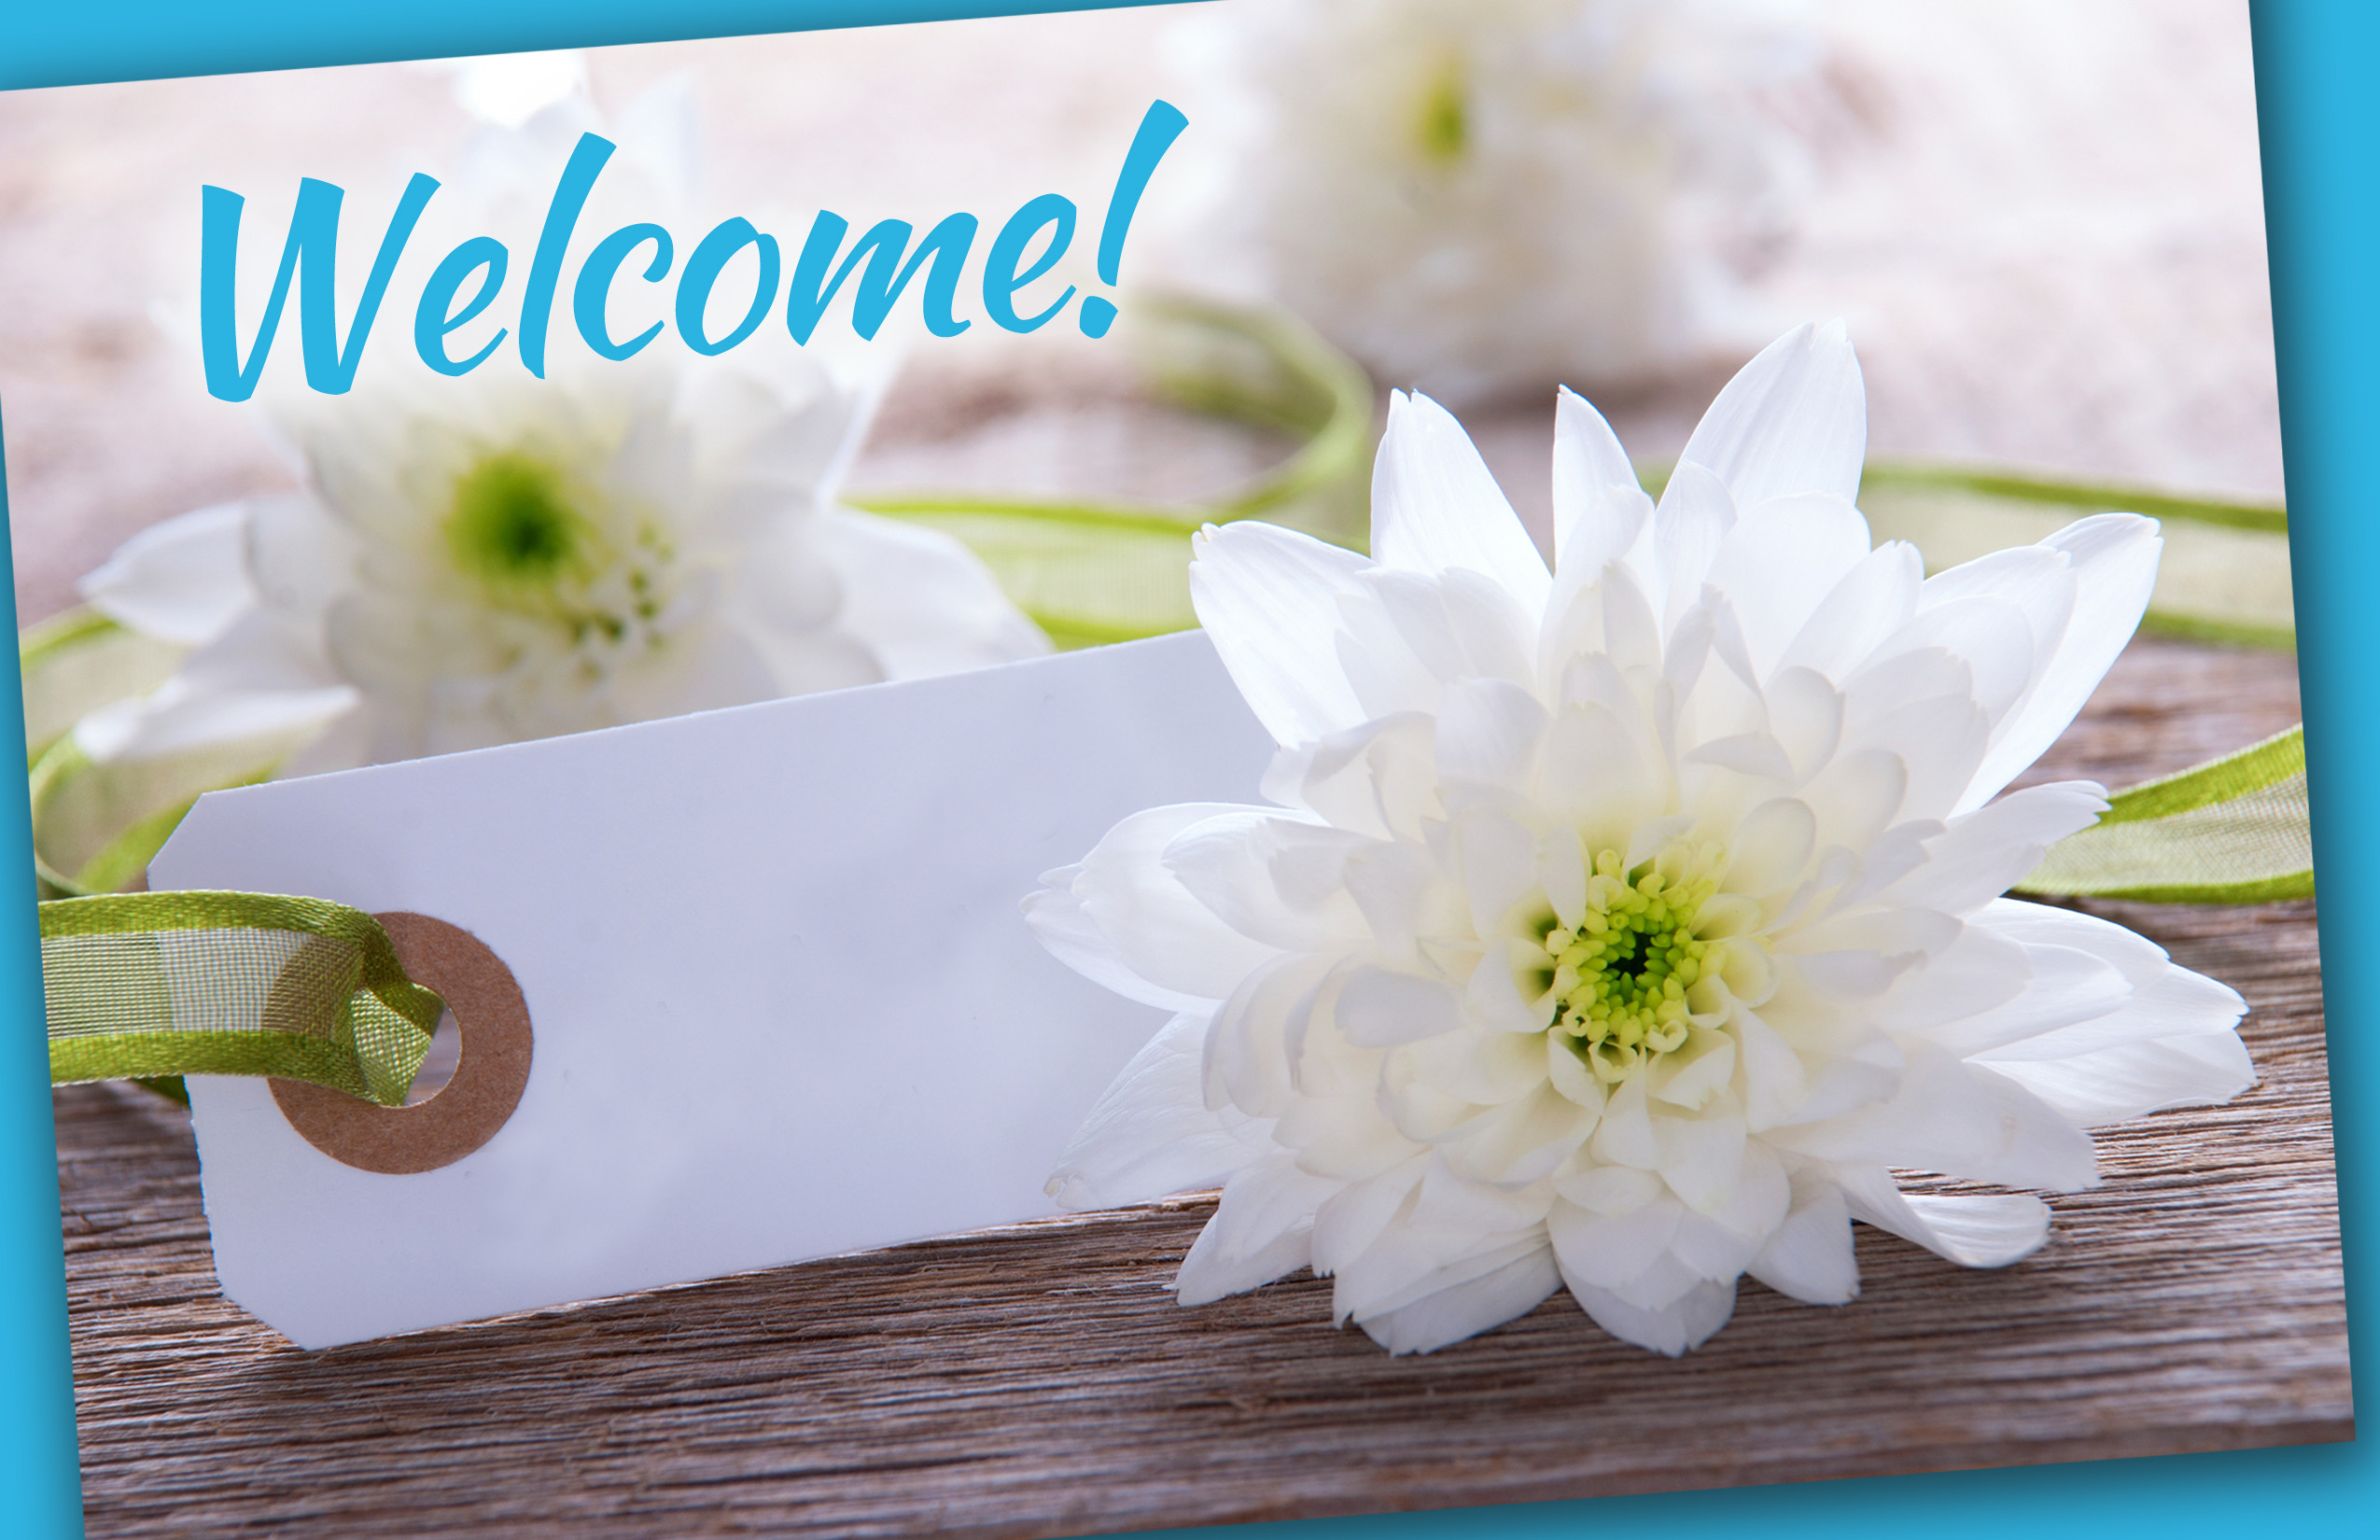 Explore Happy Wishes, Welcome New Neighbors, And More - Ppt Welcome Images  Hd - 2550x1650 Wallpaper 